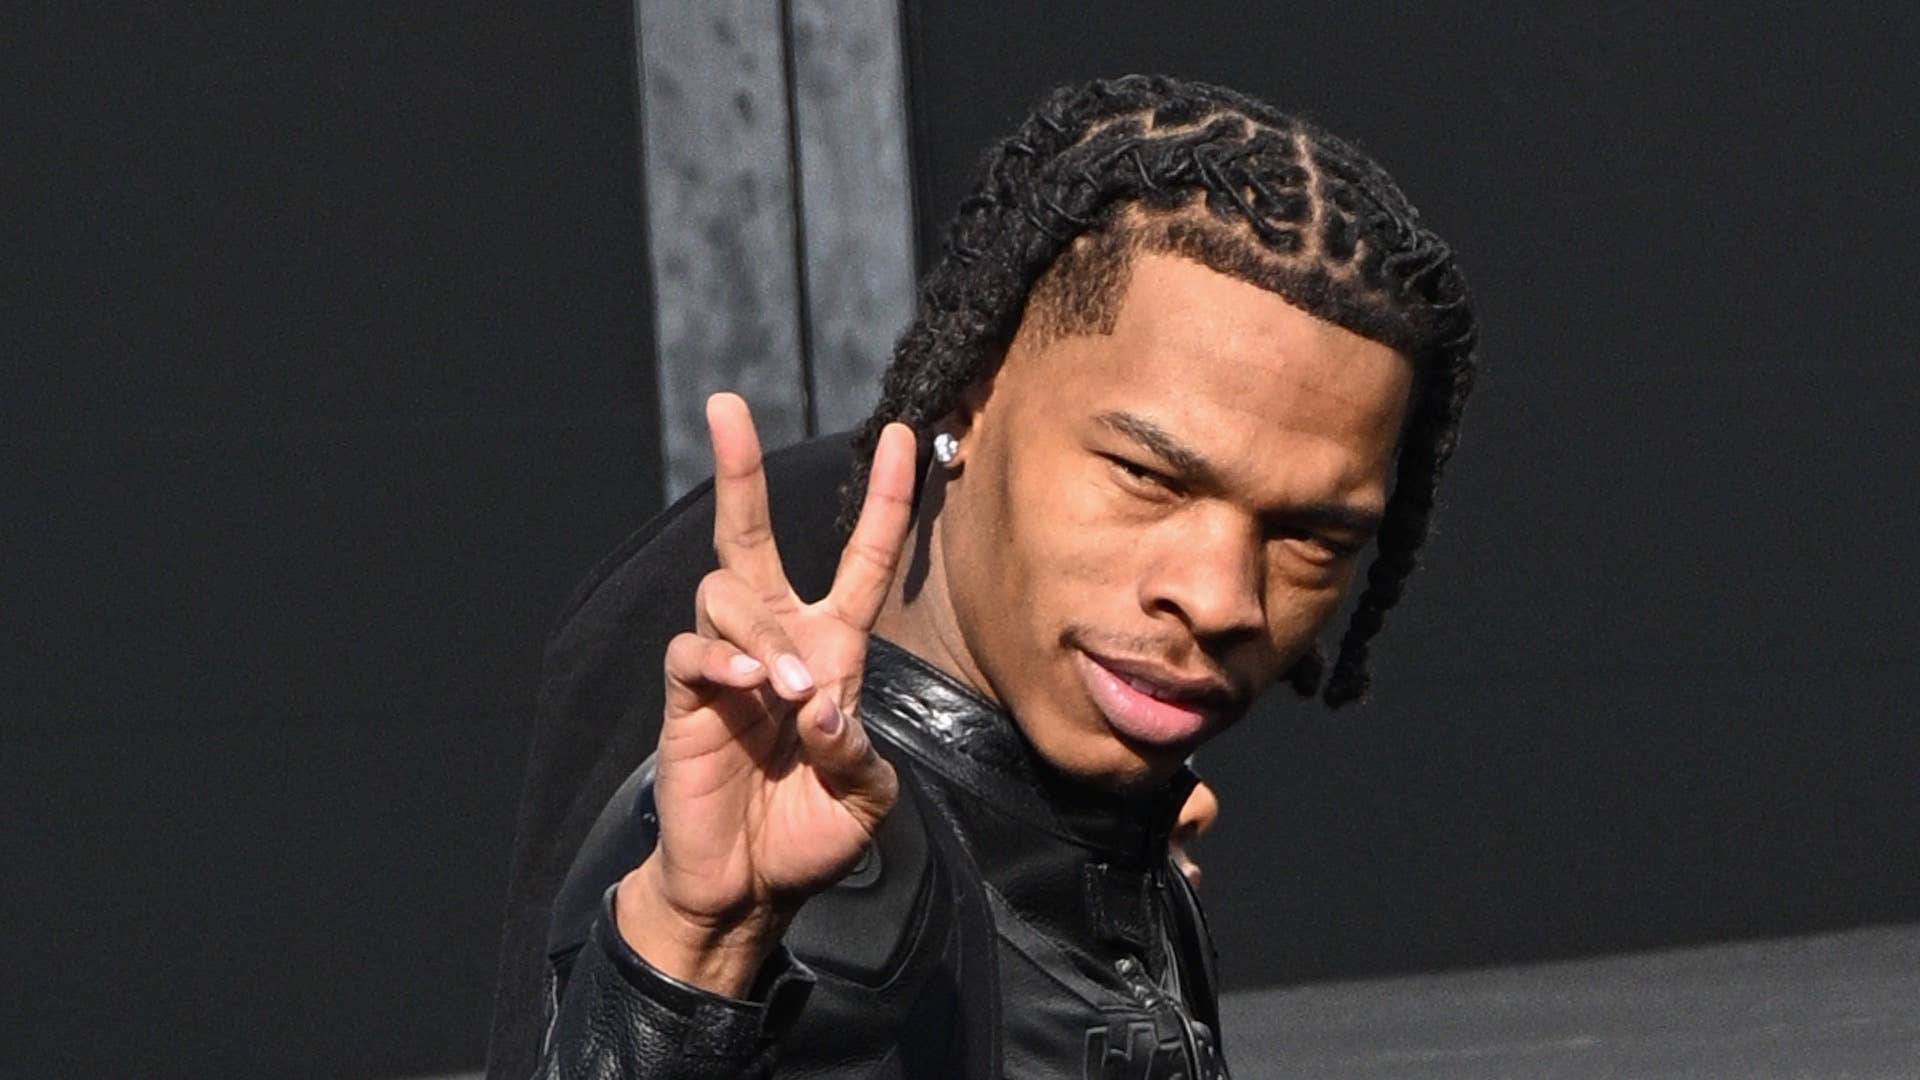 Lil Baby’s ‘My Turn’ Breaks Top 10 Record on Top R&B/Hip-Hop Albums Chart